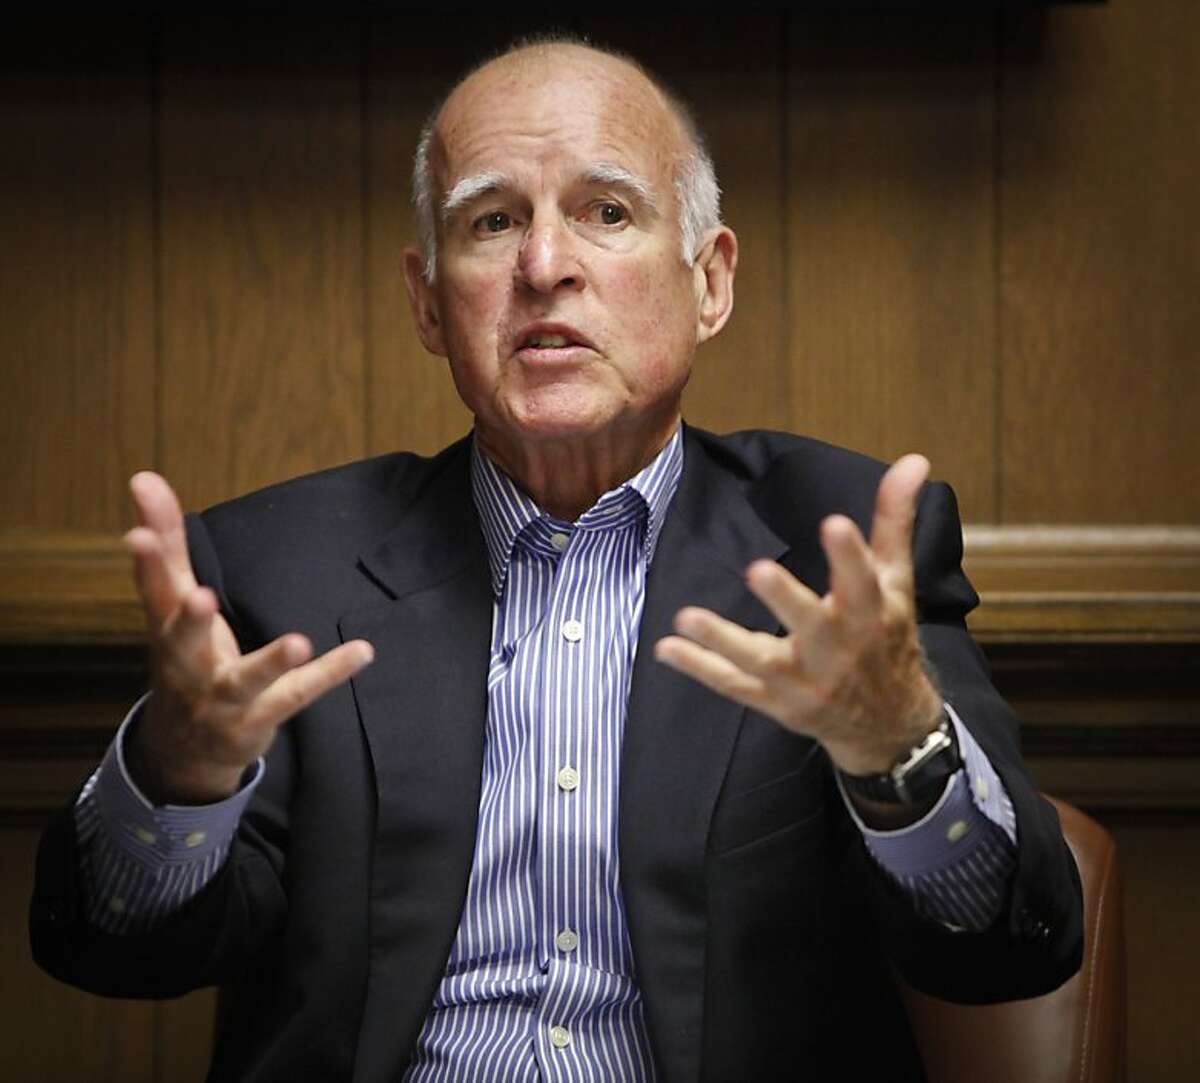 Governor Jerry Brown addresses the Chronicle editorial board on Thursday, Sep. 6, 2012 in San Francisco, Calif.